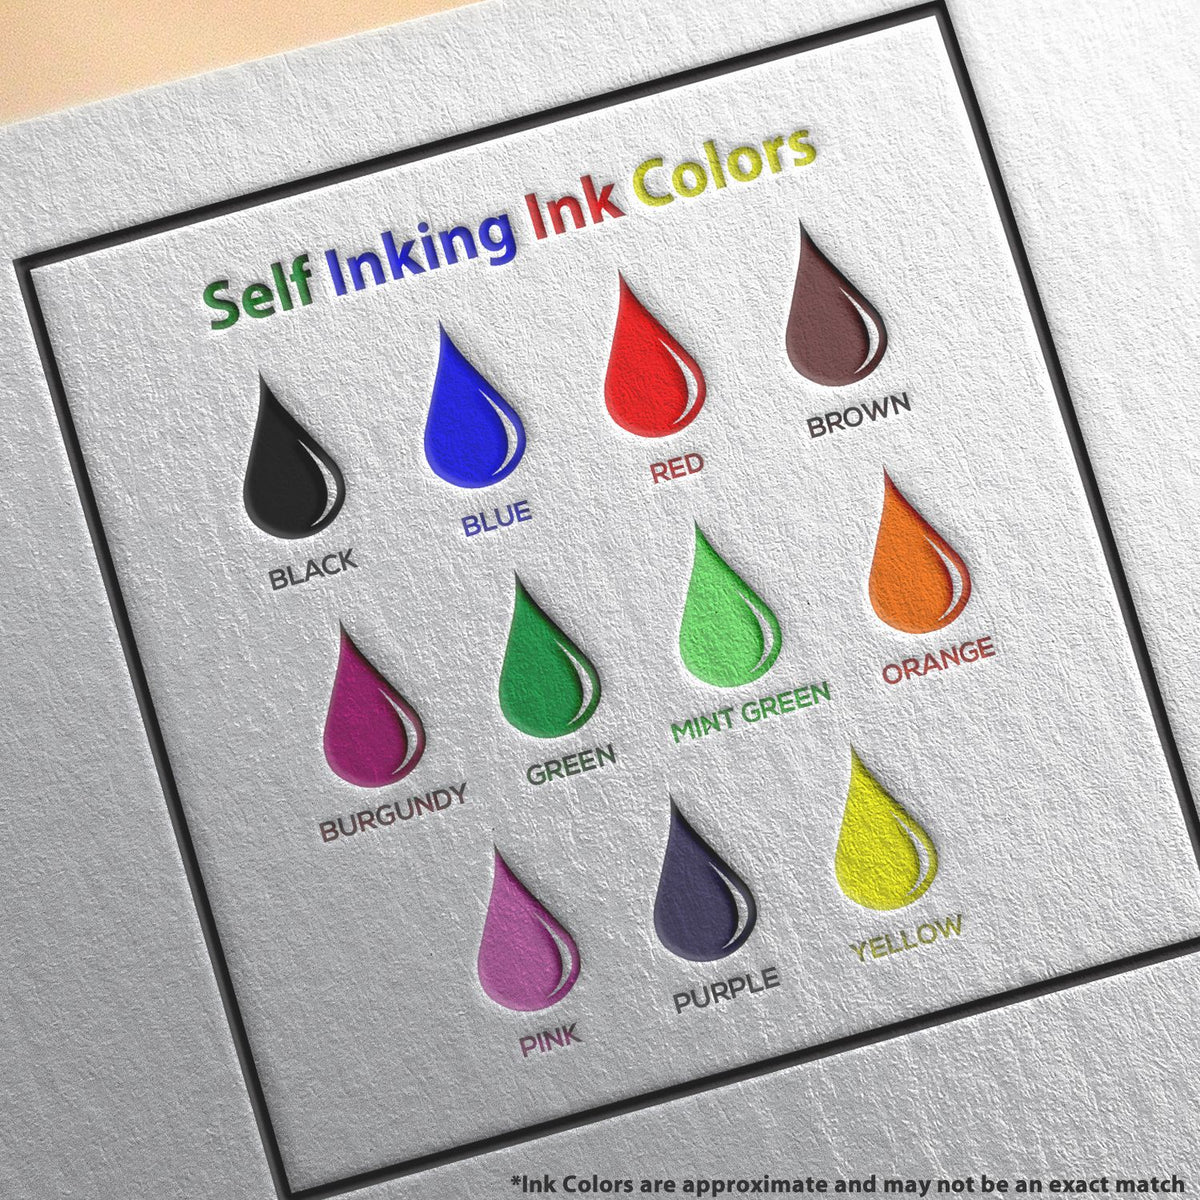 A picture showing the different ink colors or hues available for the Self-Inking New Jersey PE Stamp product.